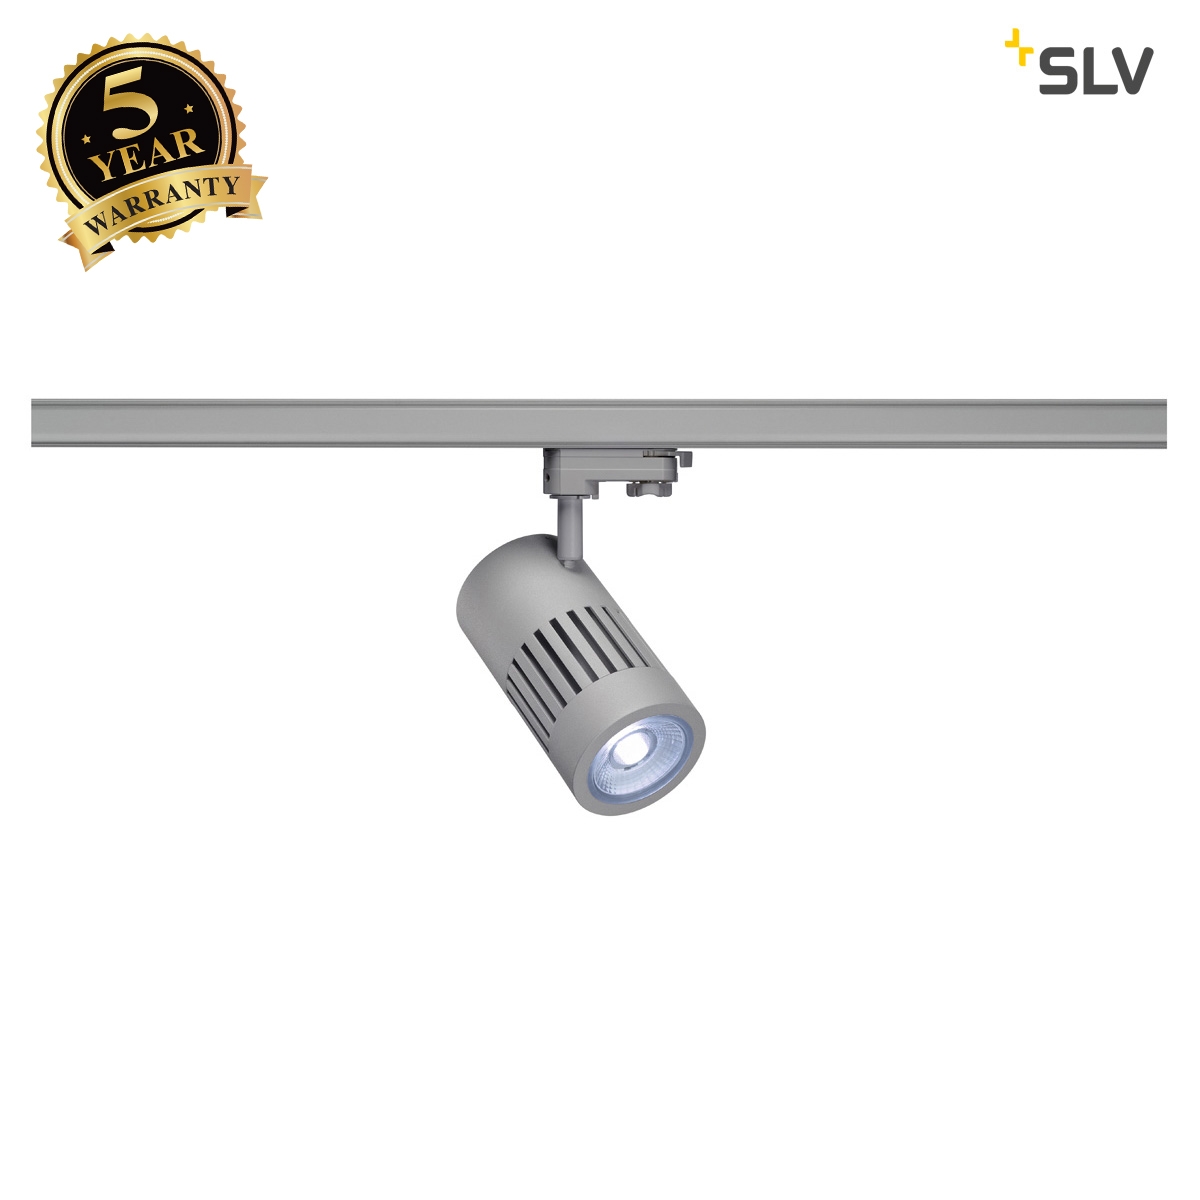 SLV STRUCTEC LED Spot for 3 circuit High-voltage Track System, 24W, 4000K, 36°, silvergrey, incl. 3 circuit Adapter 1000988